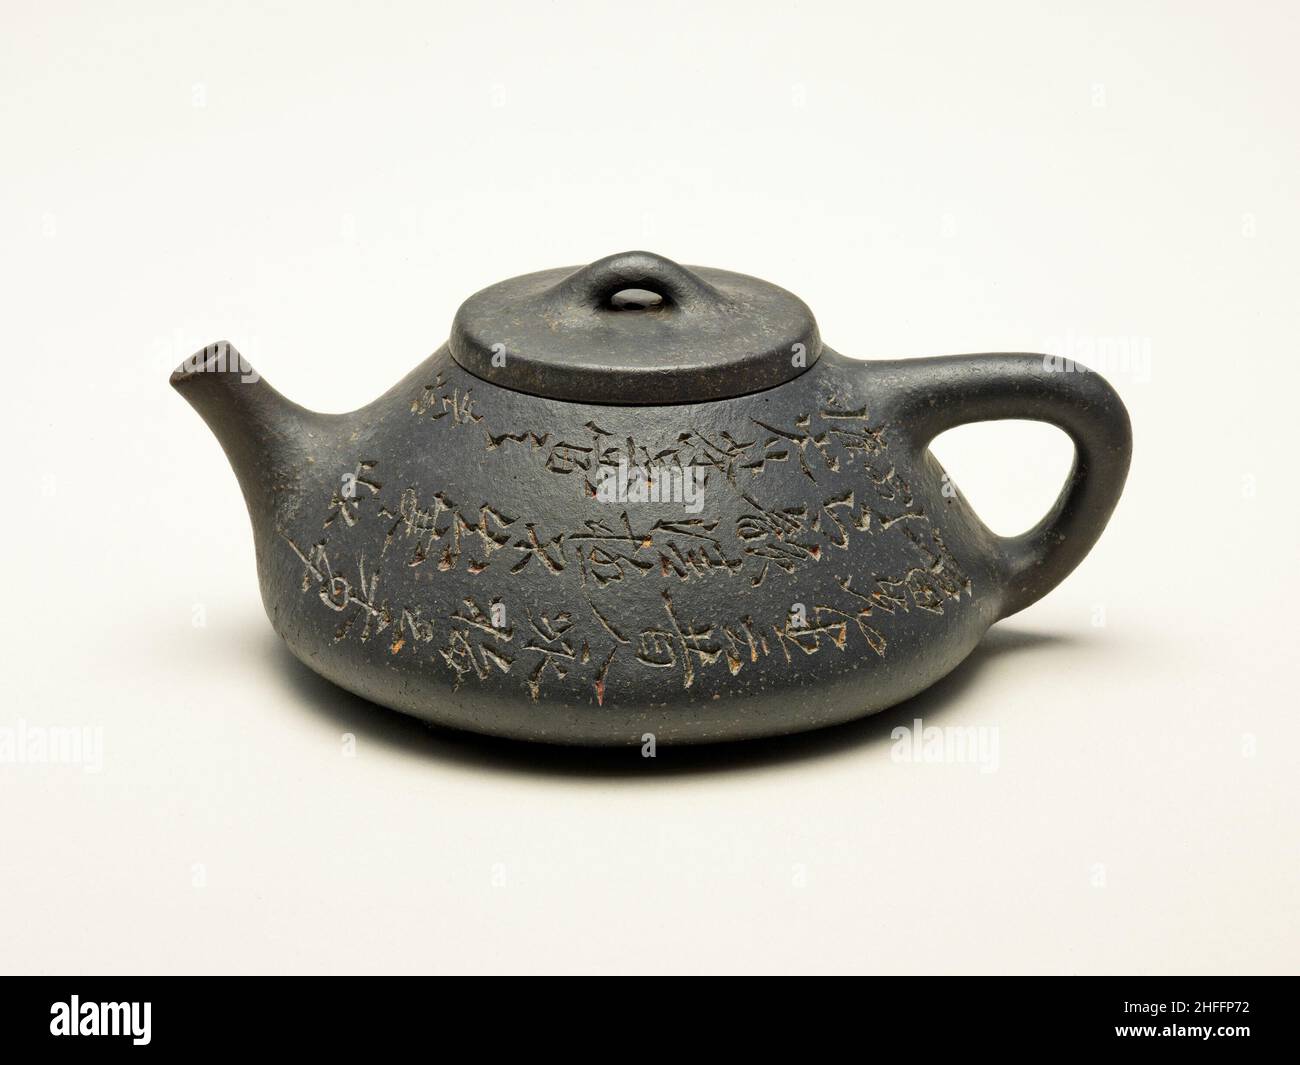 https://c8.alamy.com/comp/2HFFP72/teapot-shaped-like-a-bamboo-hat-qing-dynasty-1644-1911-first-half-of-the-19th-century-2HFFP72.jpg